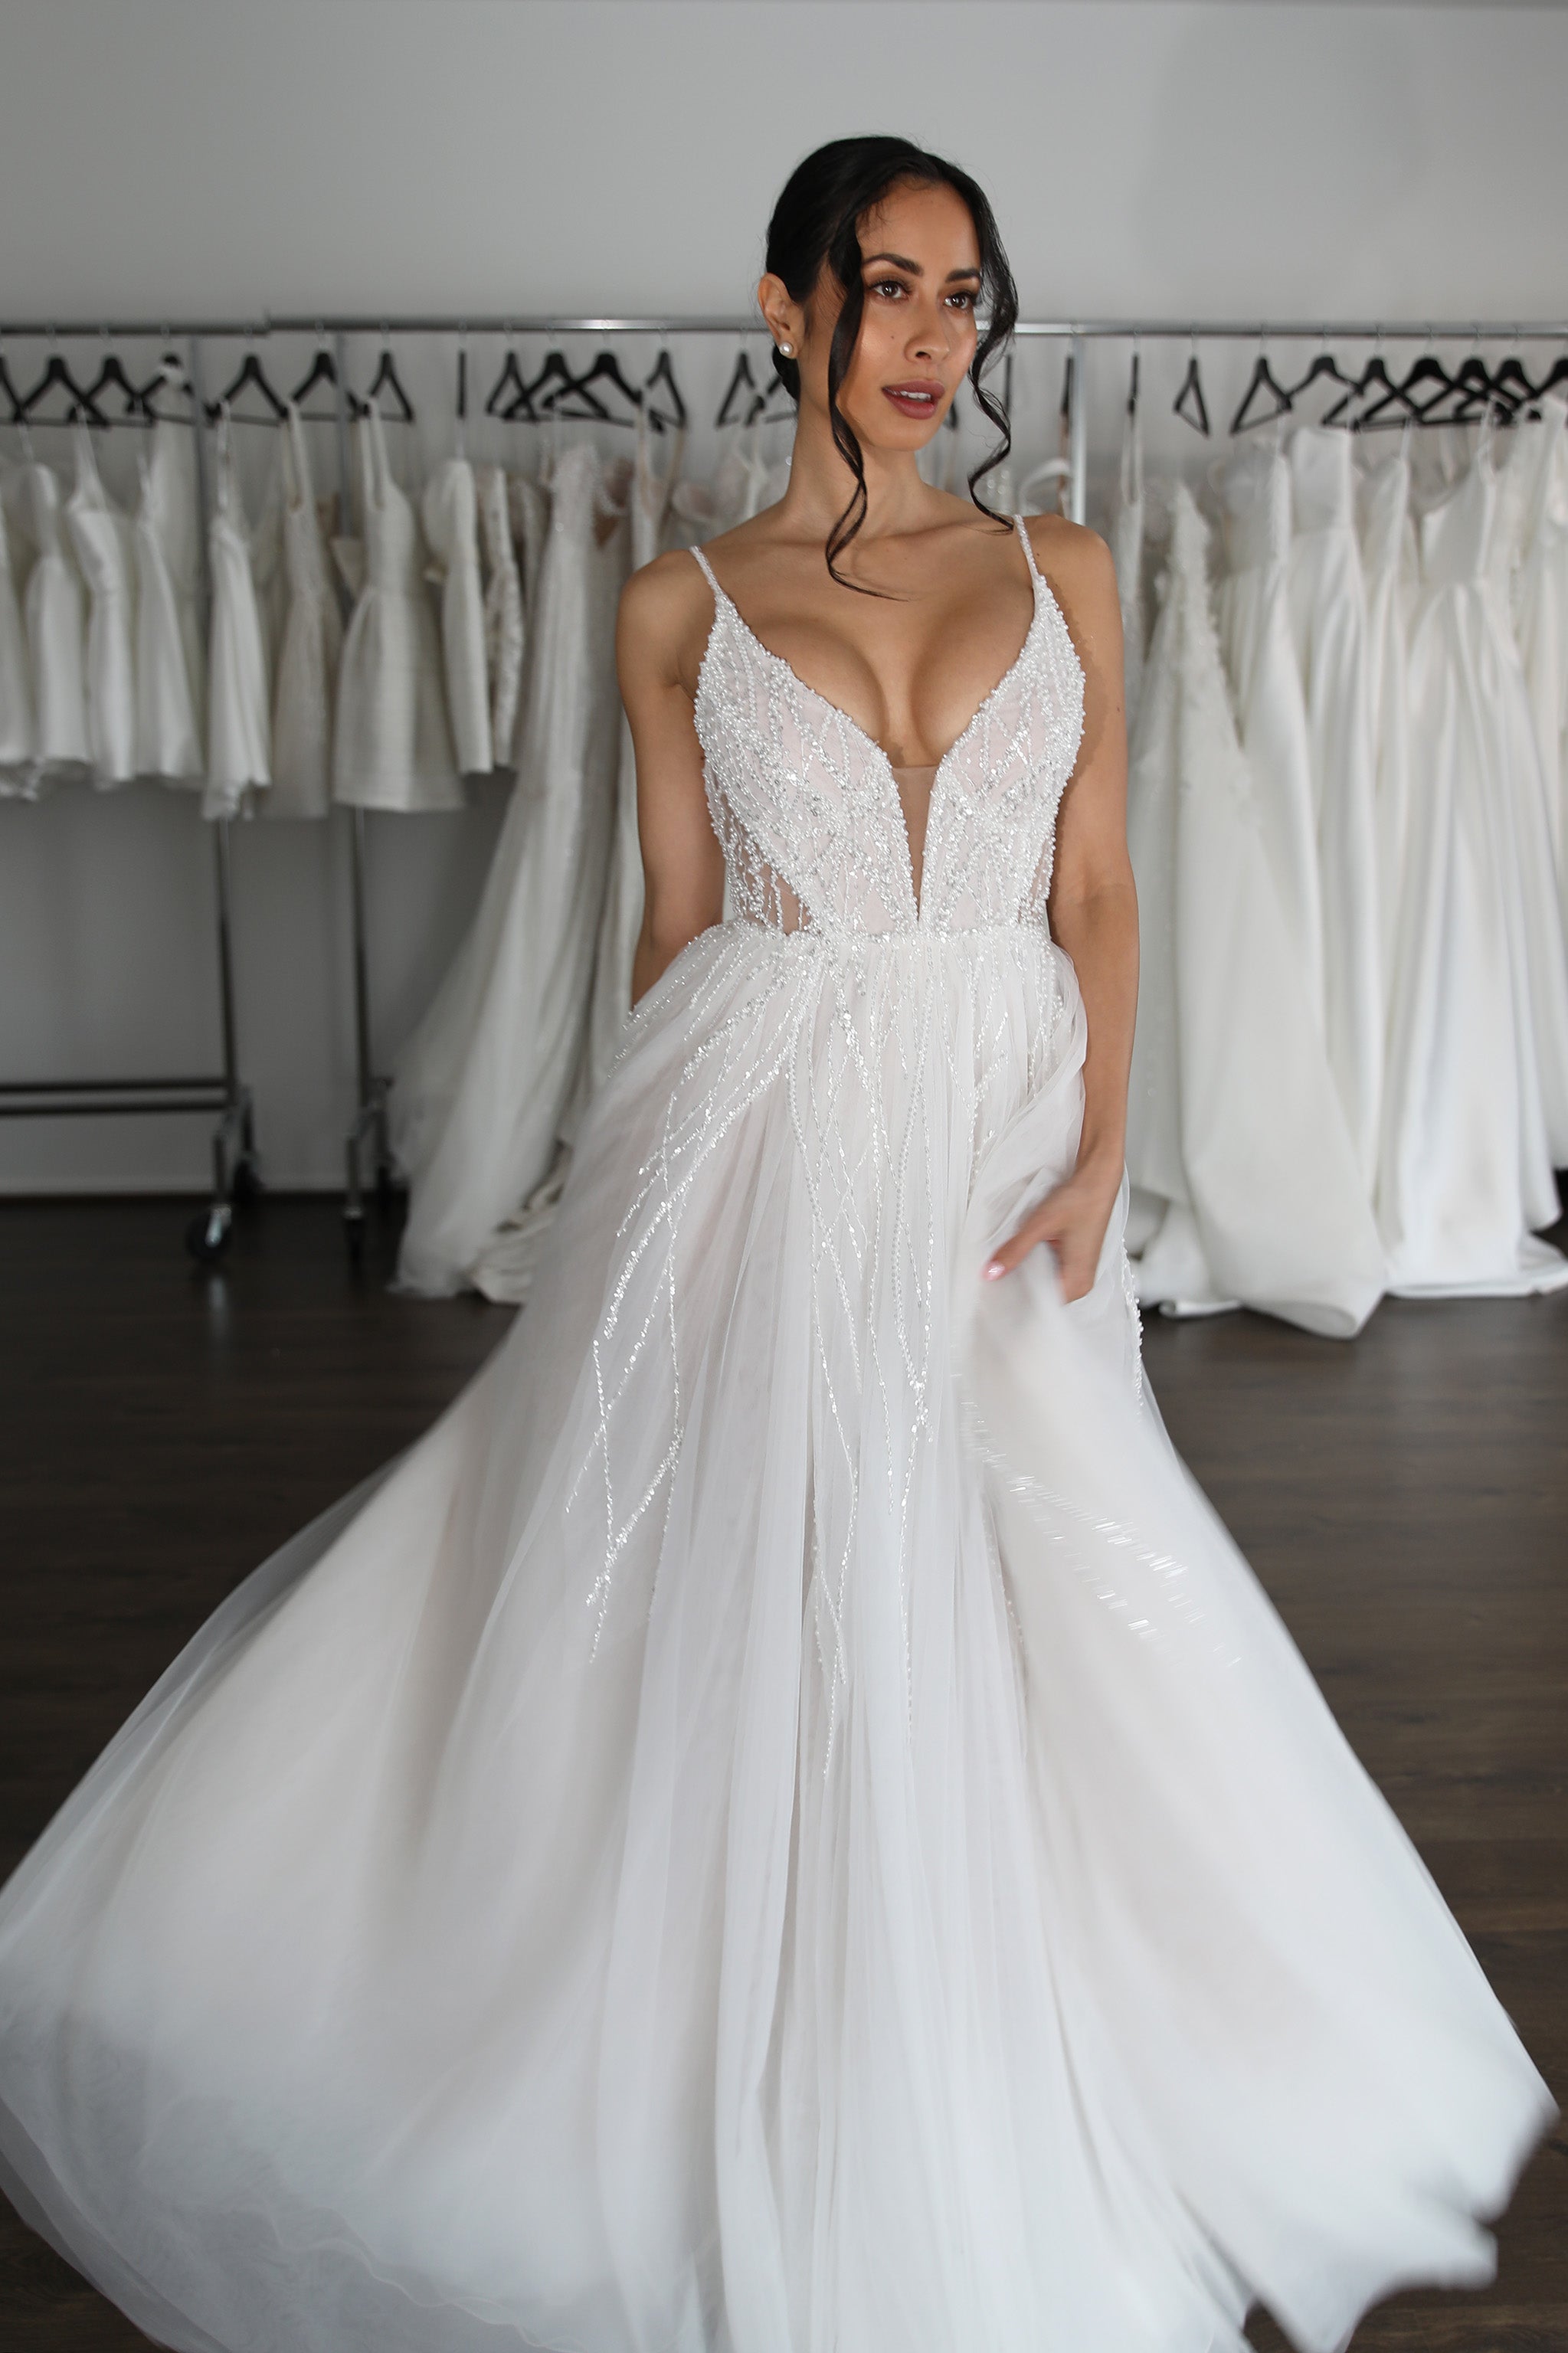 beaded lace wedding dress with v-neck and flowing tulle skirt